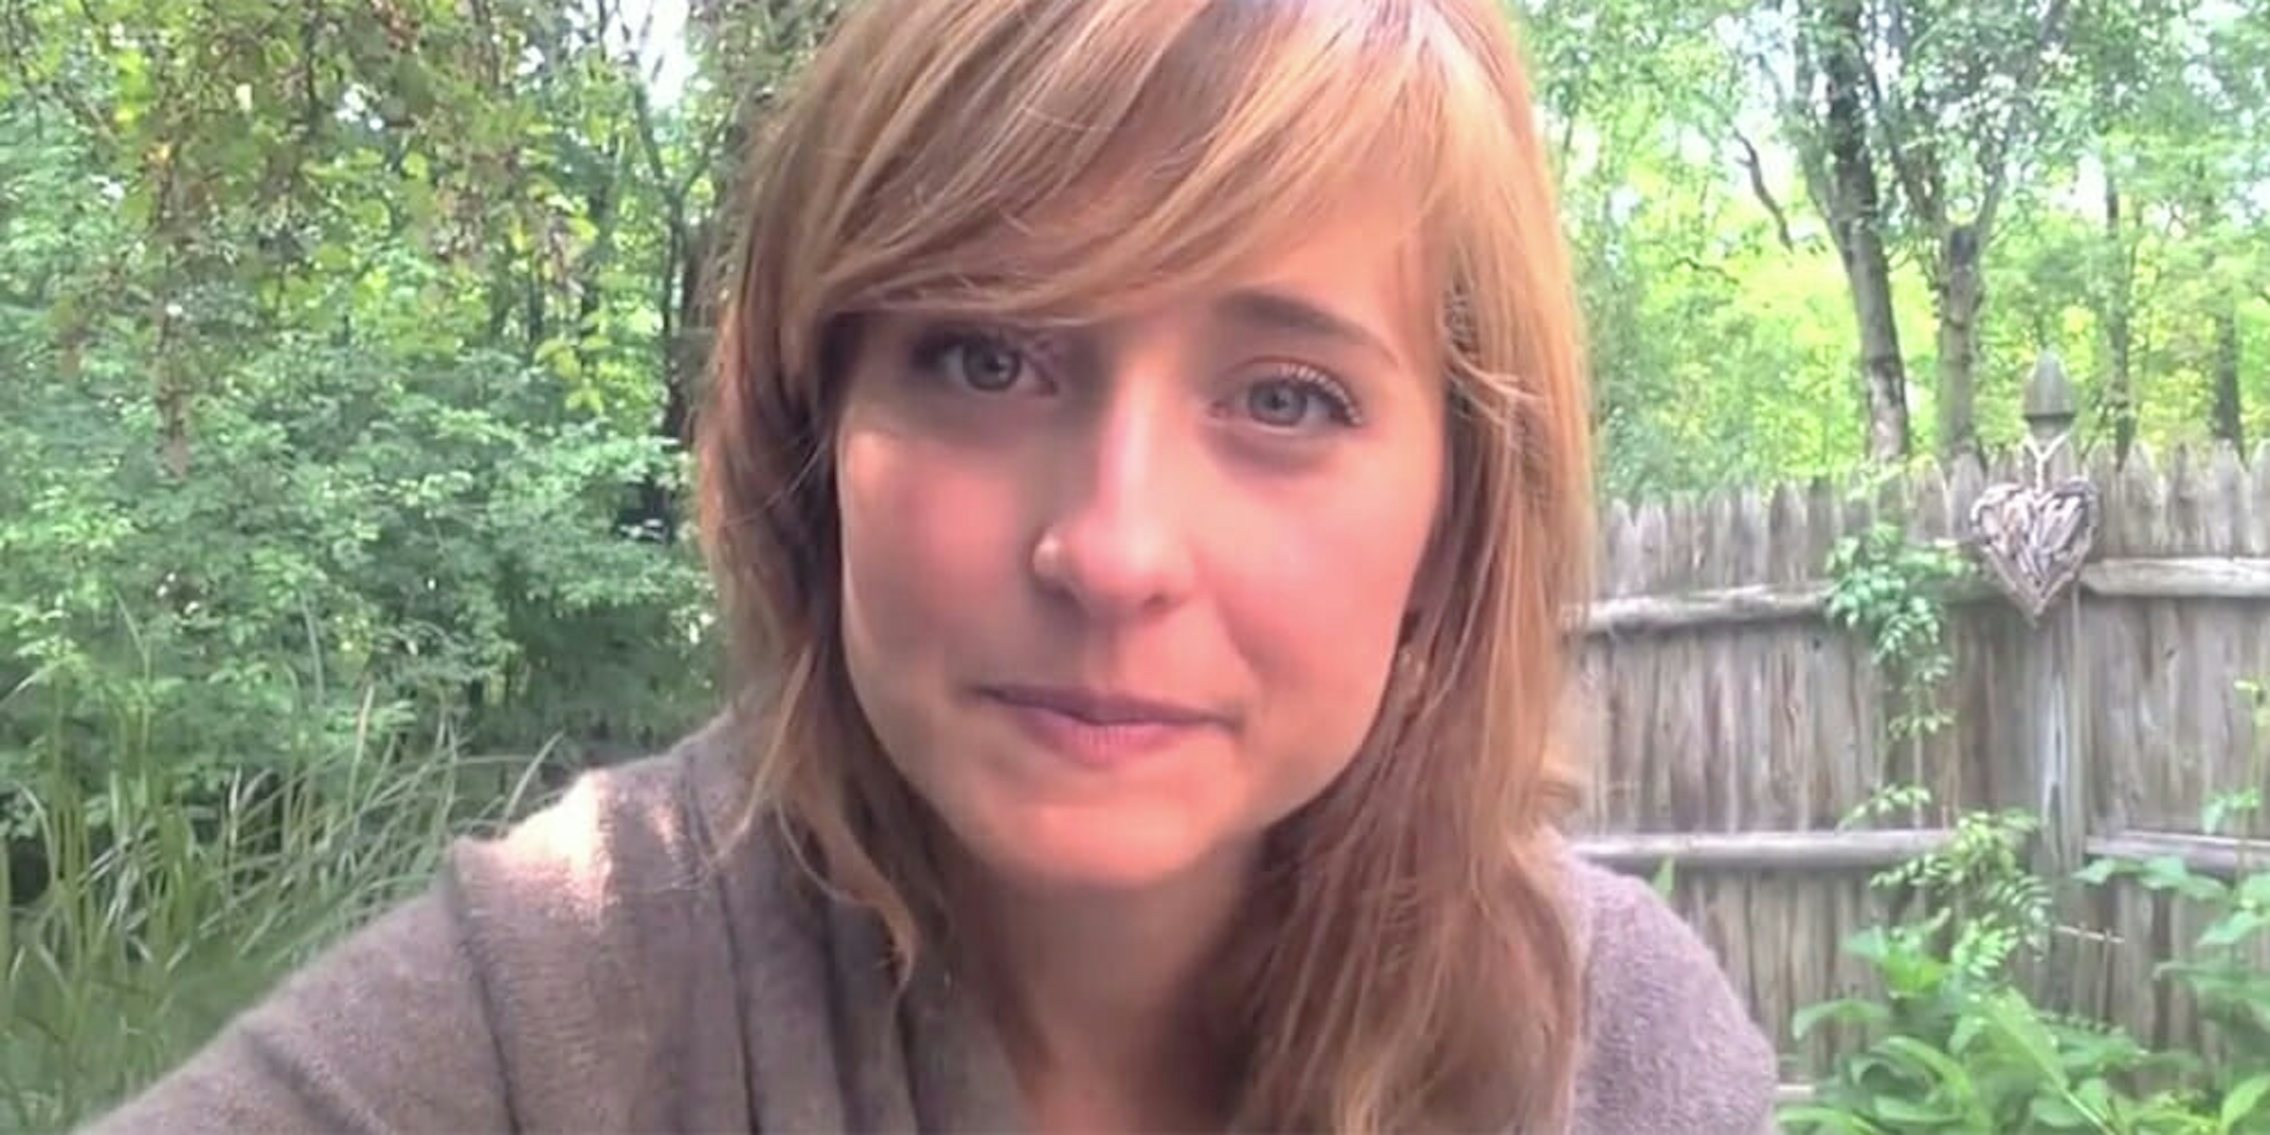 'Smallville' actress Allison Mack has been arrested in connection with an alleged sex cult.